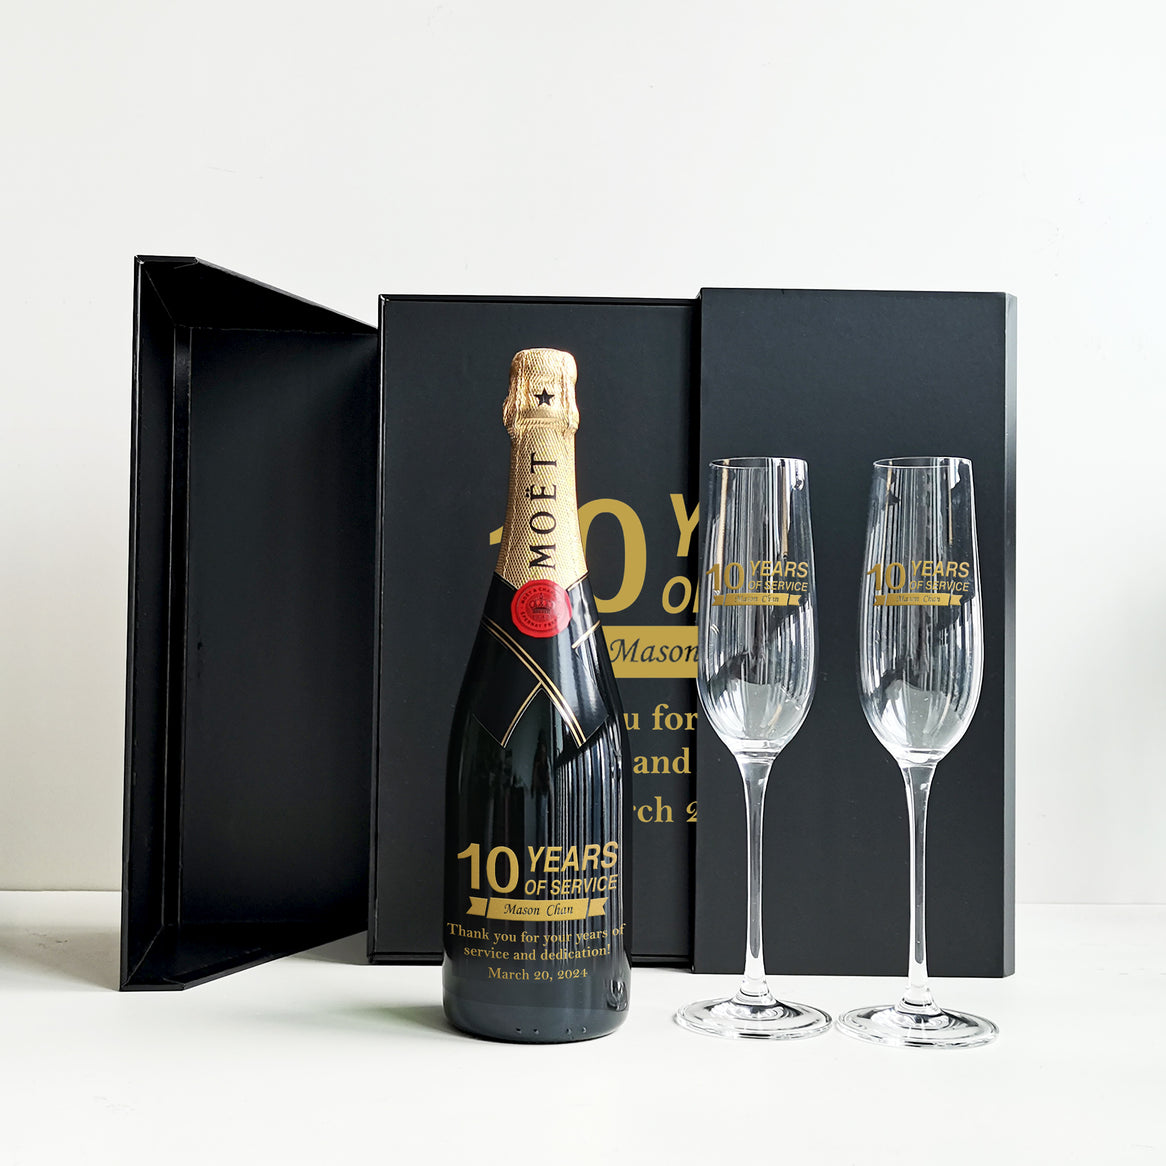 corporate gifts|Moët & Chandon Impérial & Champagne Glasses Gift Set - Design Your Own Wine